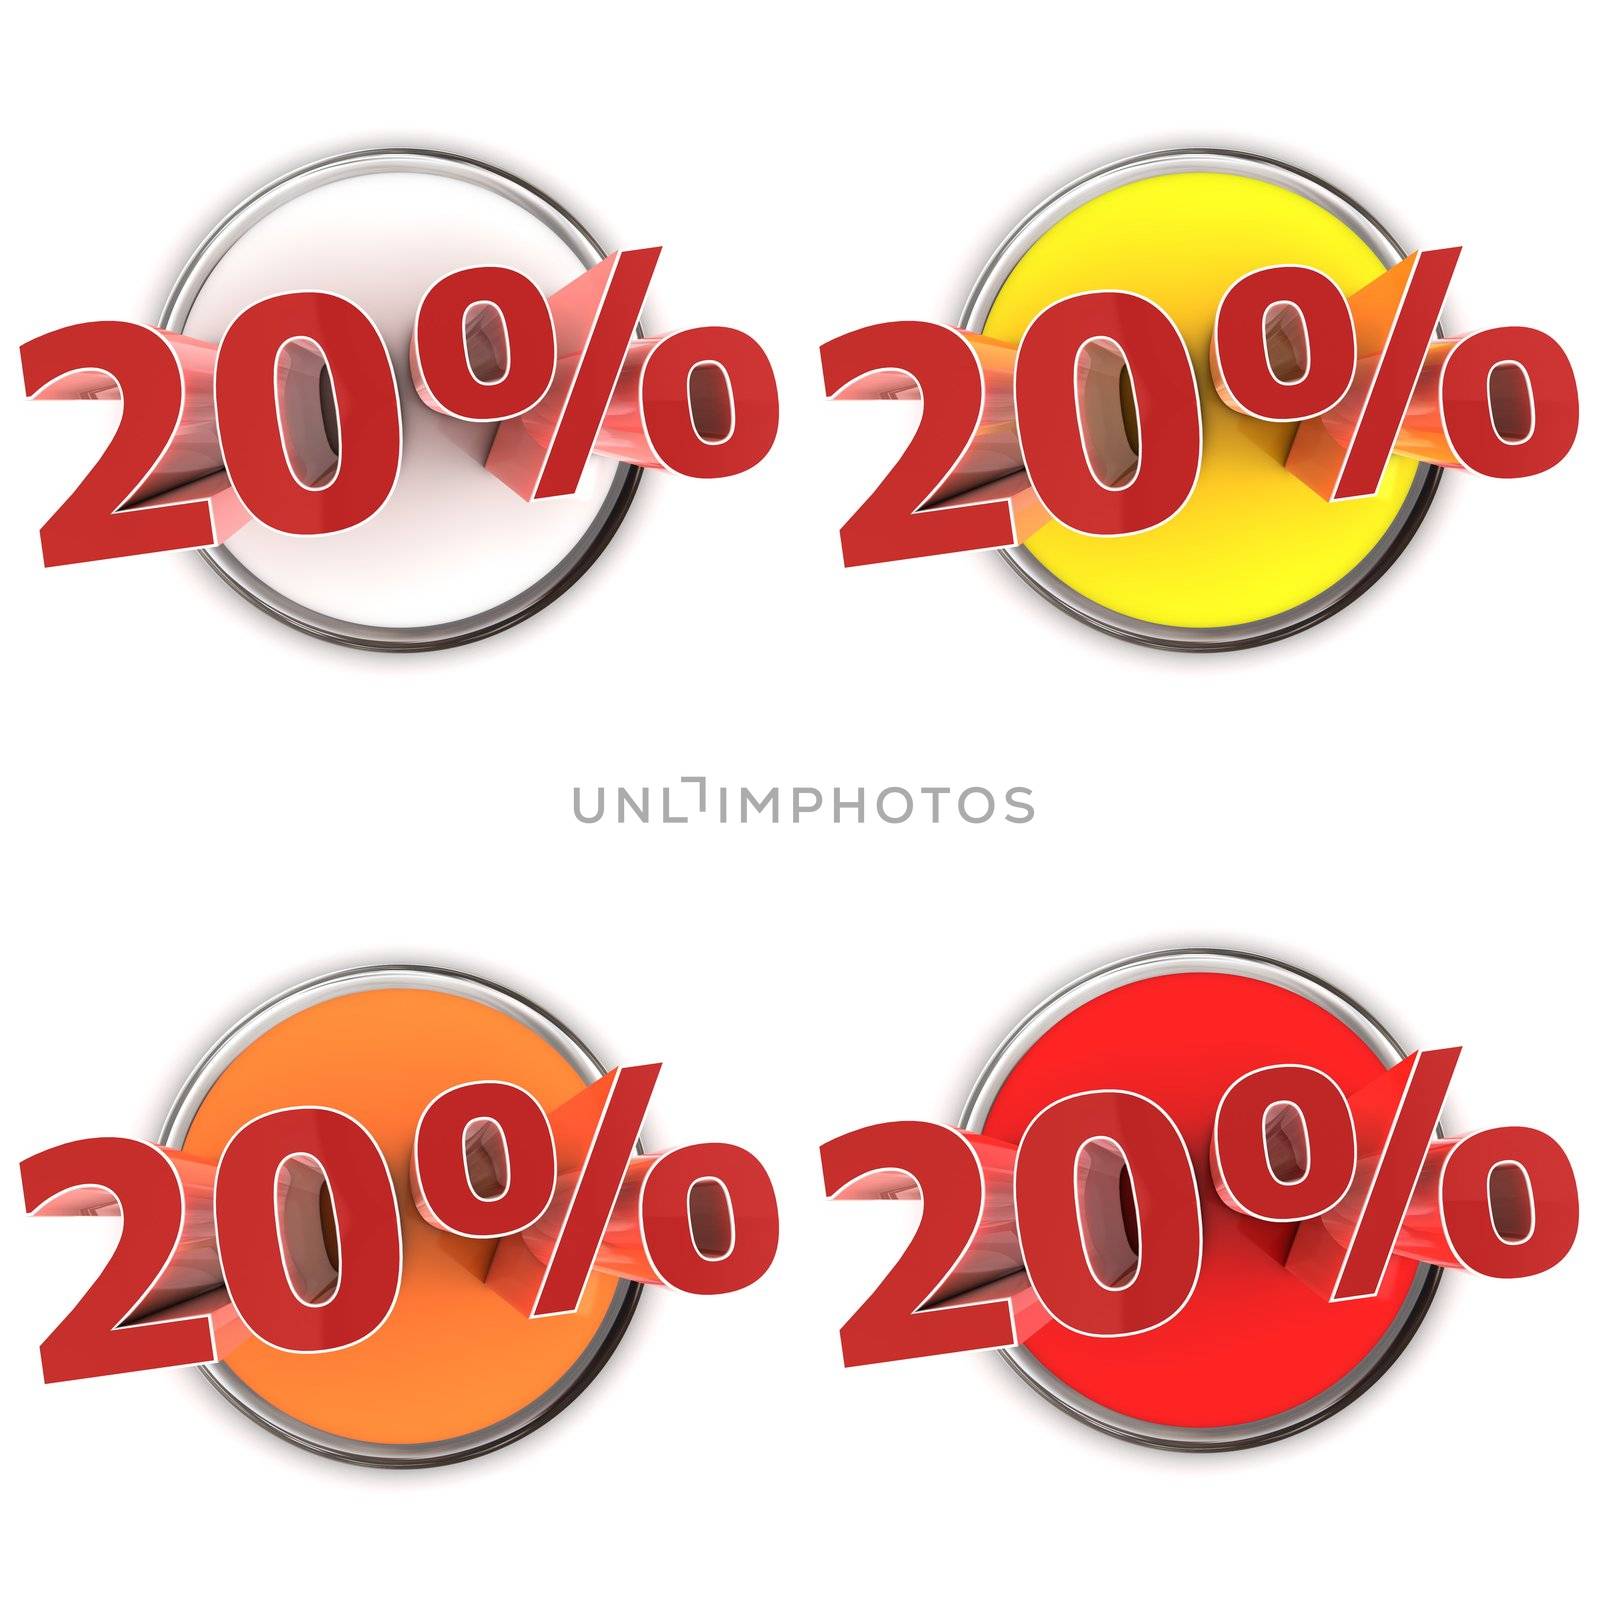 Discount Buttons - 20% by PixBox